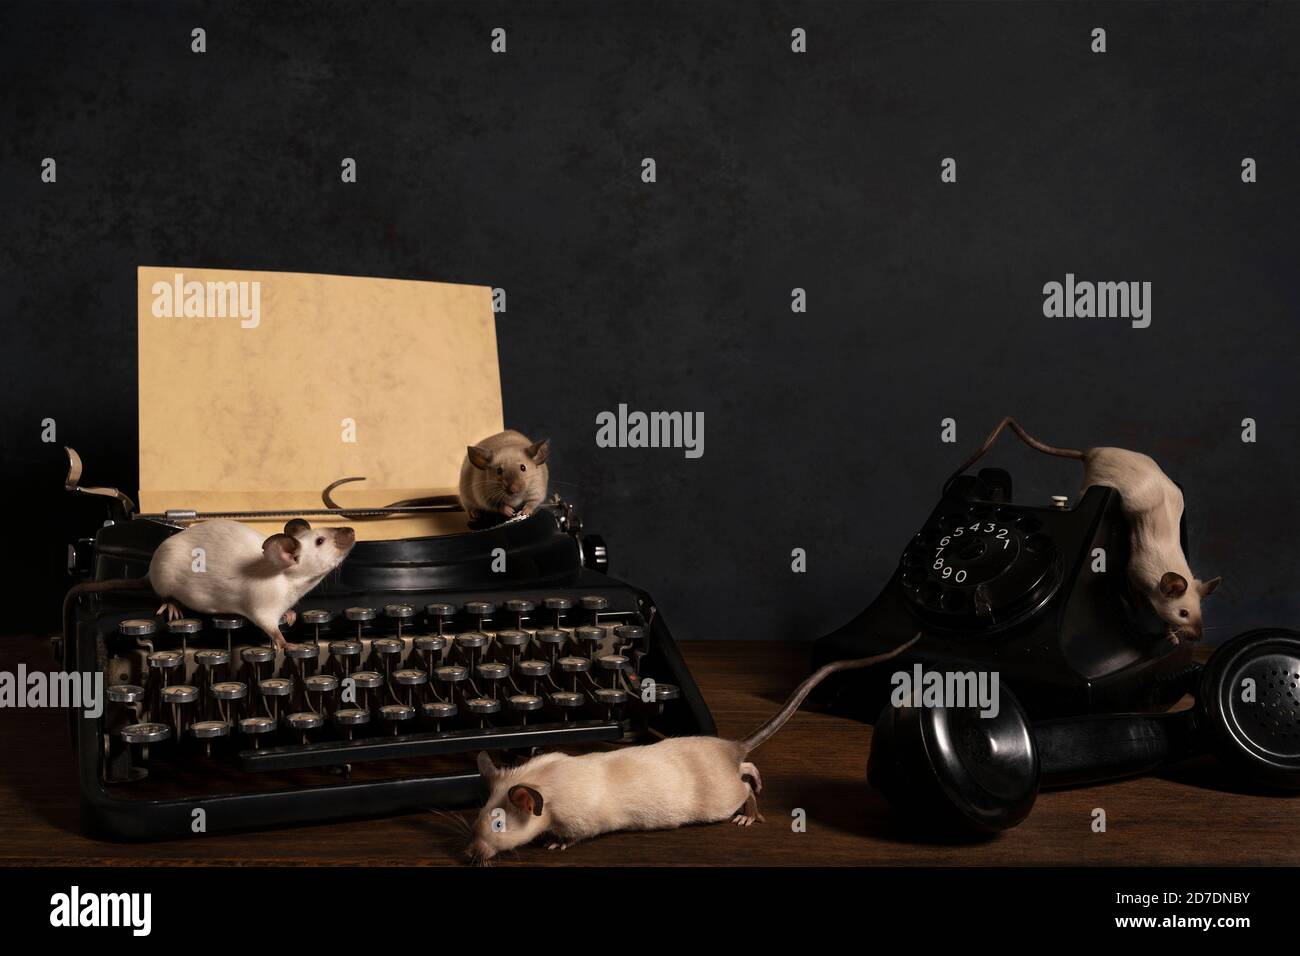 A Still life with siamese mice on a typewriter and phone making contact and communicating Stock Photo